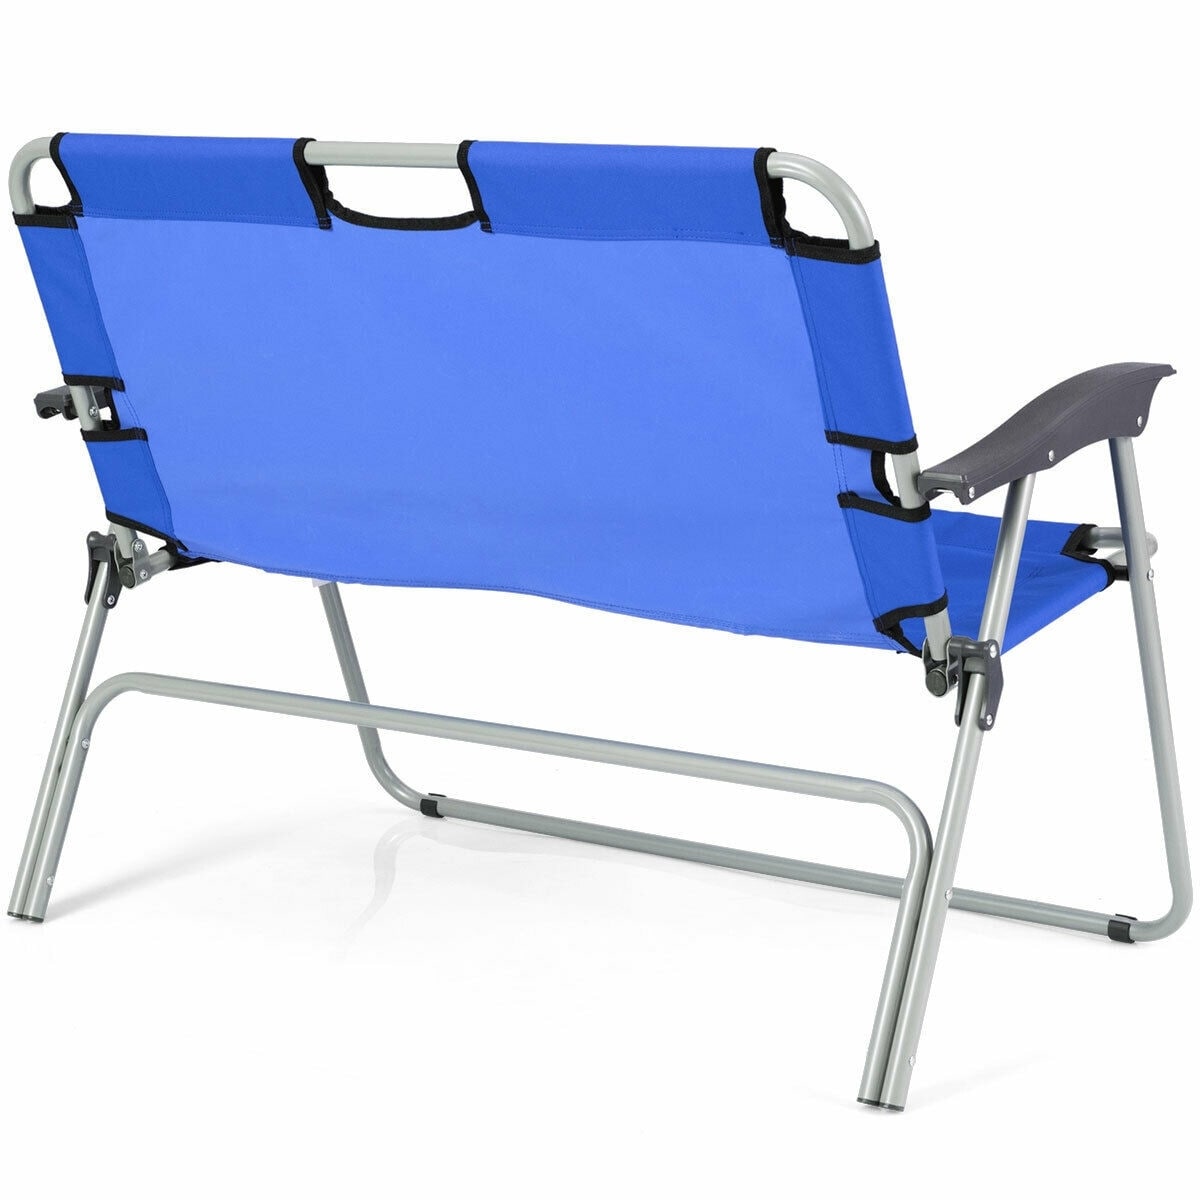 2 person folding camping bench portable double chairblue